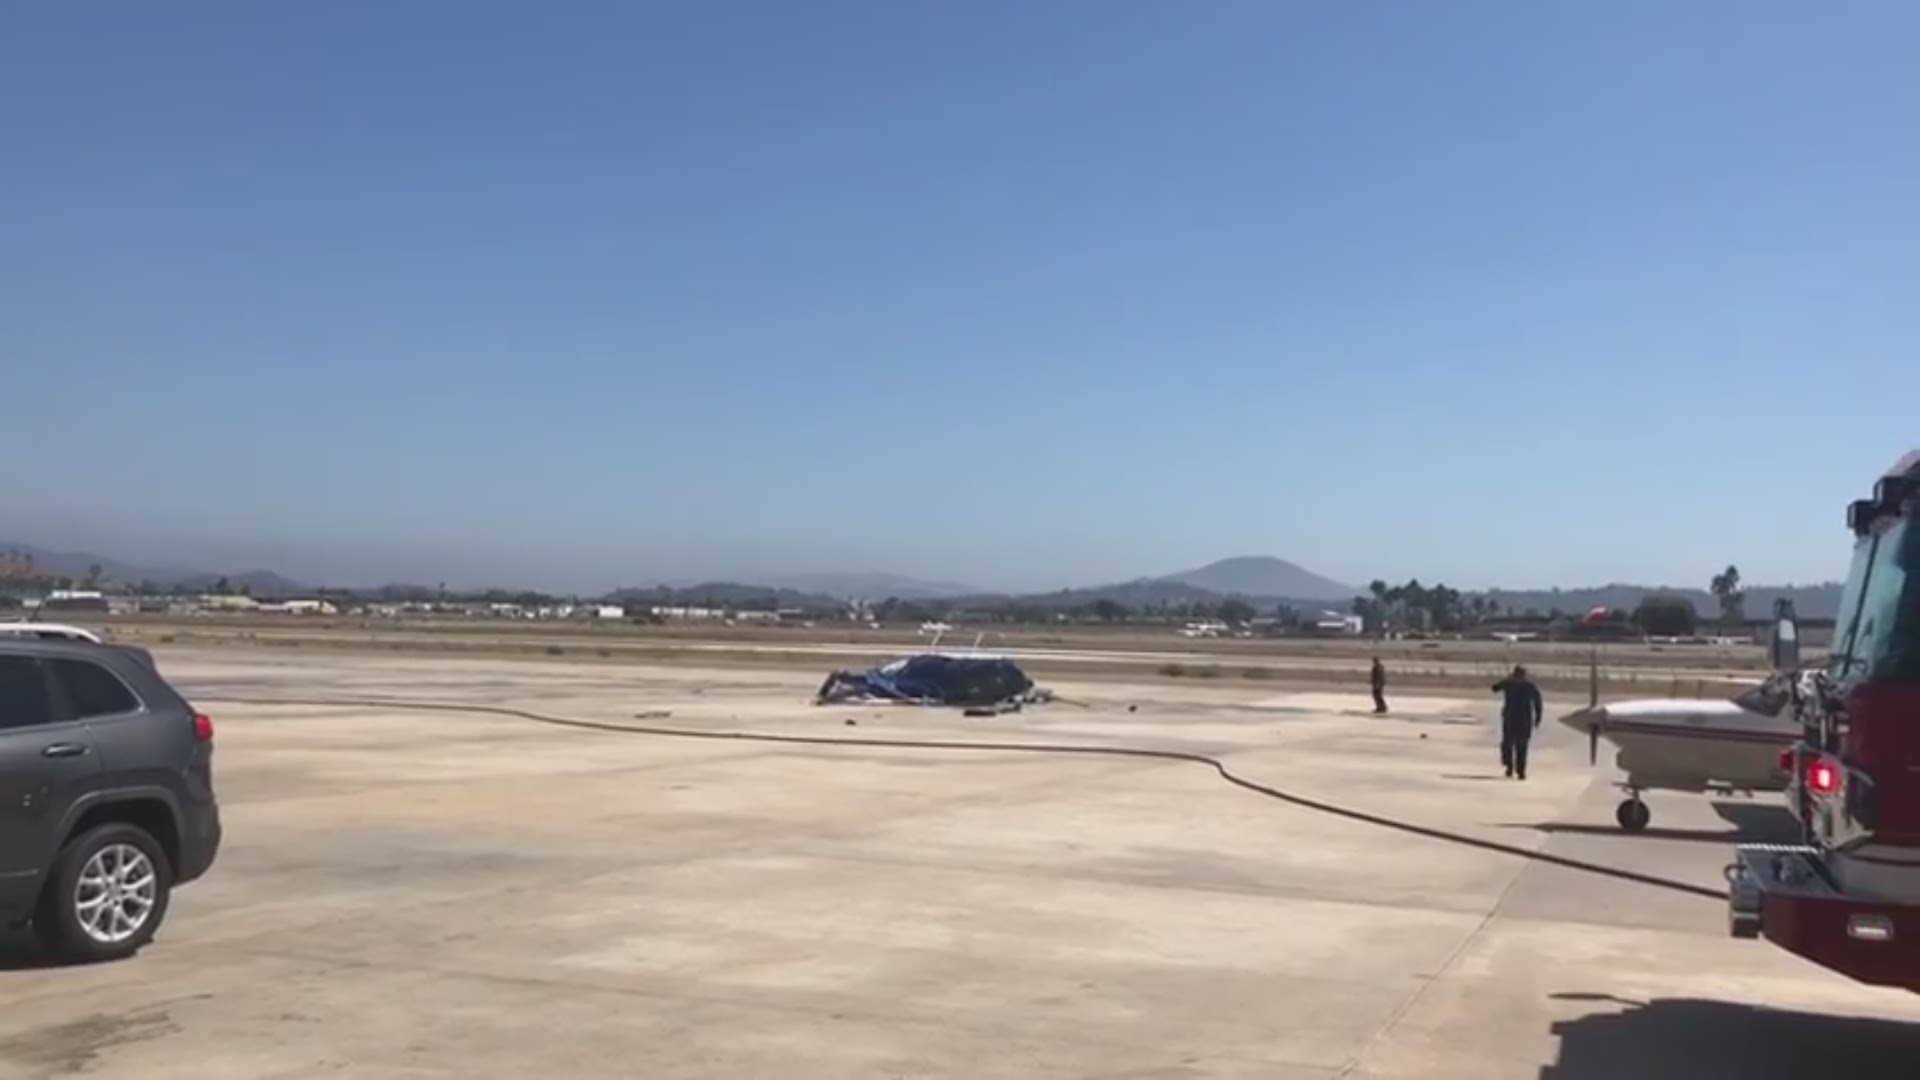 Video from Jill Barto captures news helicopter on its side at Gillespie Field San Diego